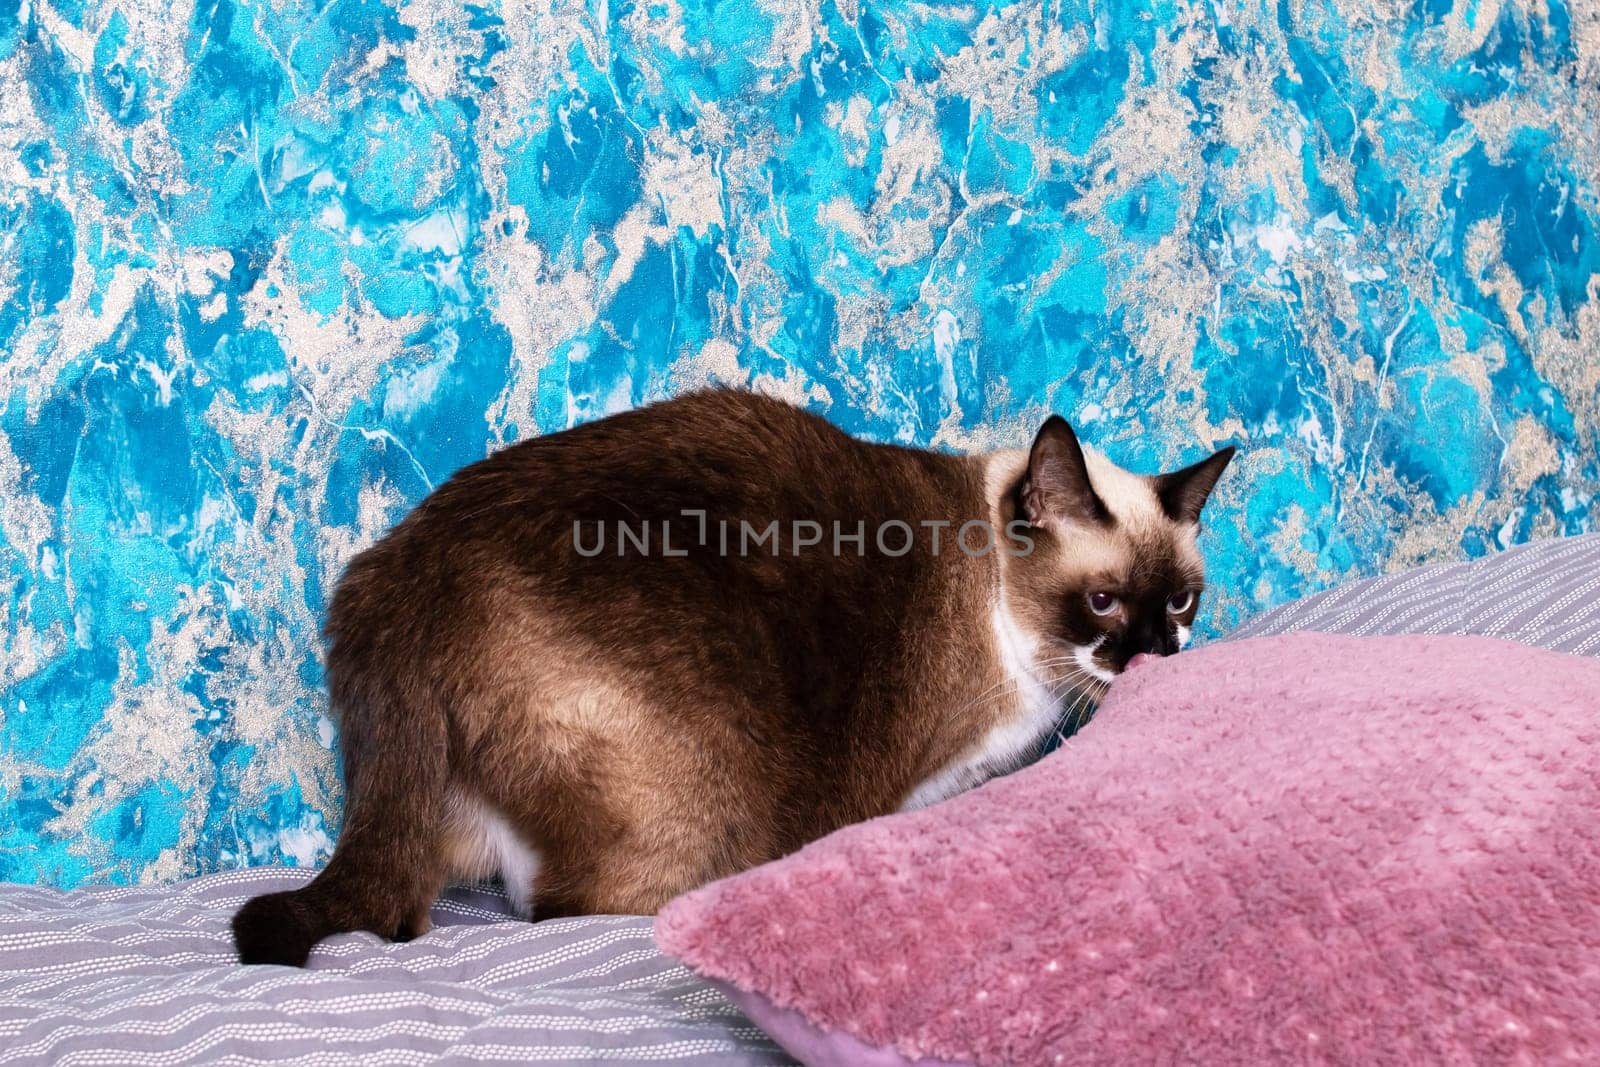 Gray cat with blue eyes lying on the bed close up